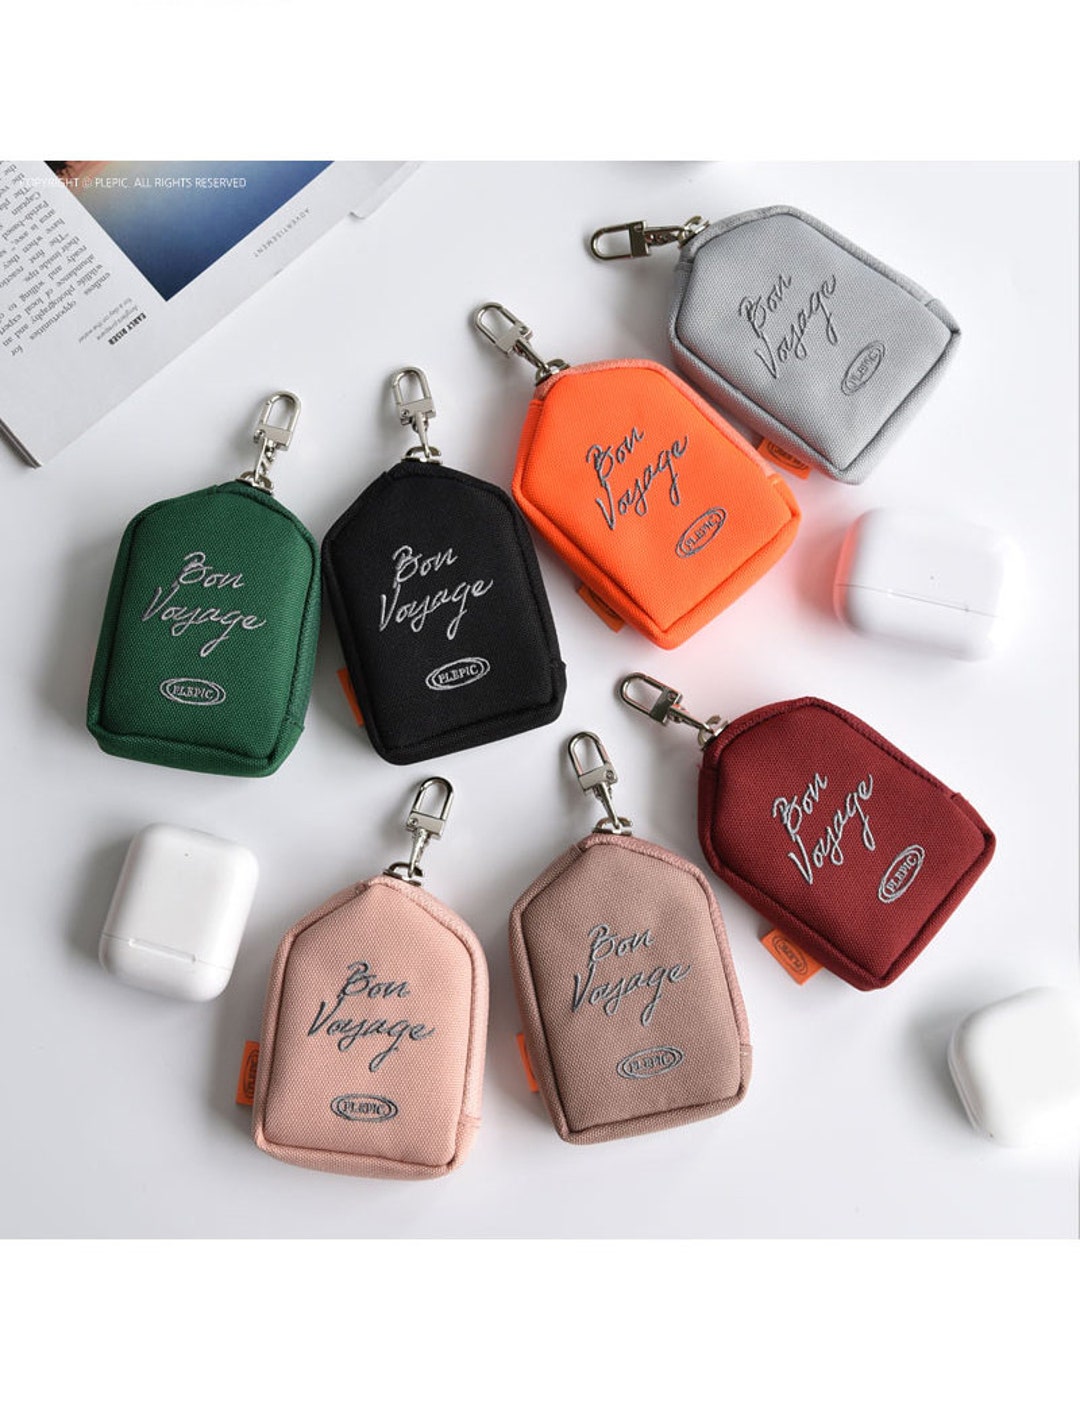 Airpods Case 7 Vivid Colors Earbuds Pouch Galaxy Buds Bag - Etsy